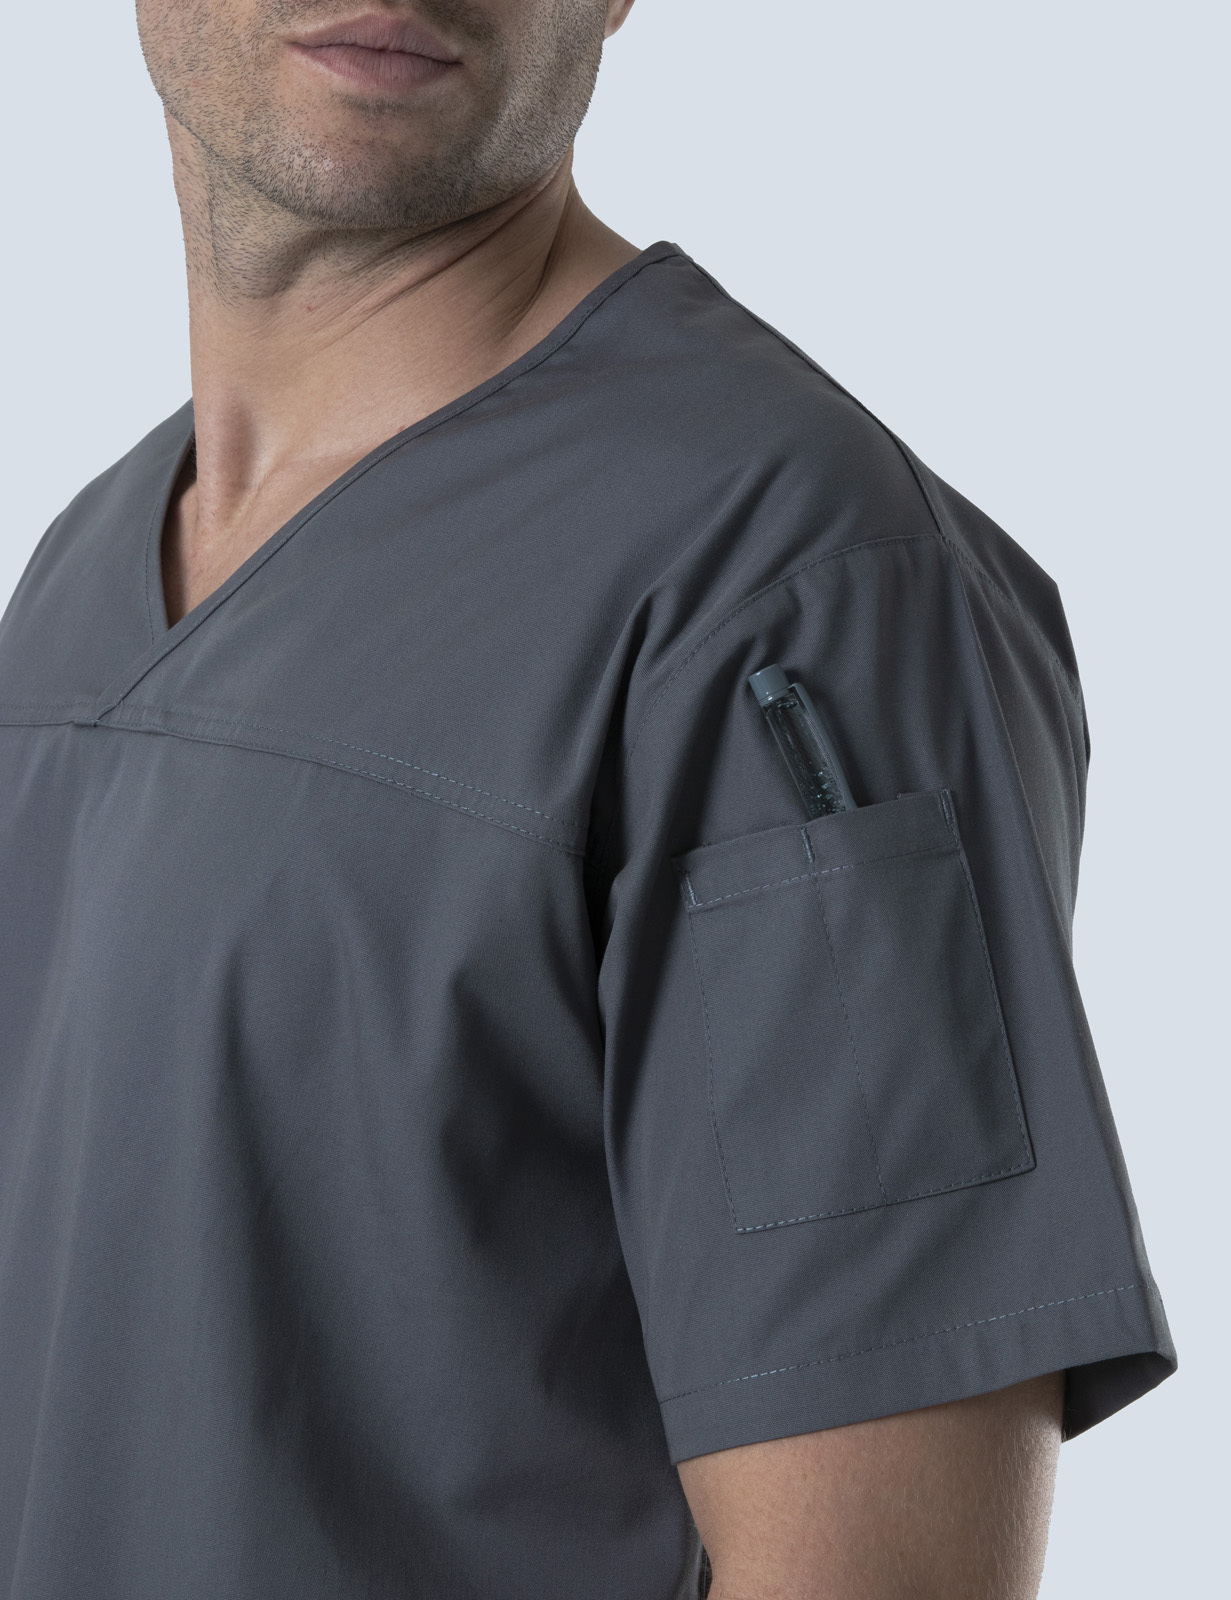 North Shore Private Hospital Imaging Assistant Uniform Top Only Bundle (Men's Fit Solid  Top in Steel Grey + Logo)